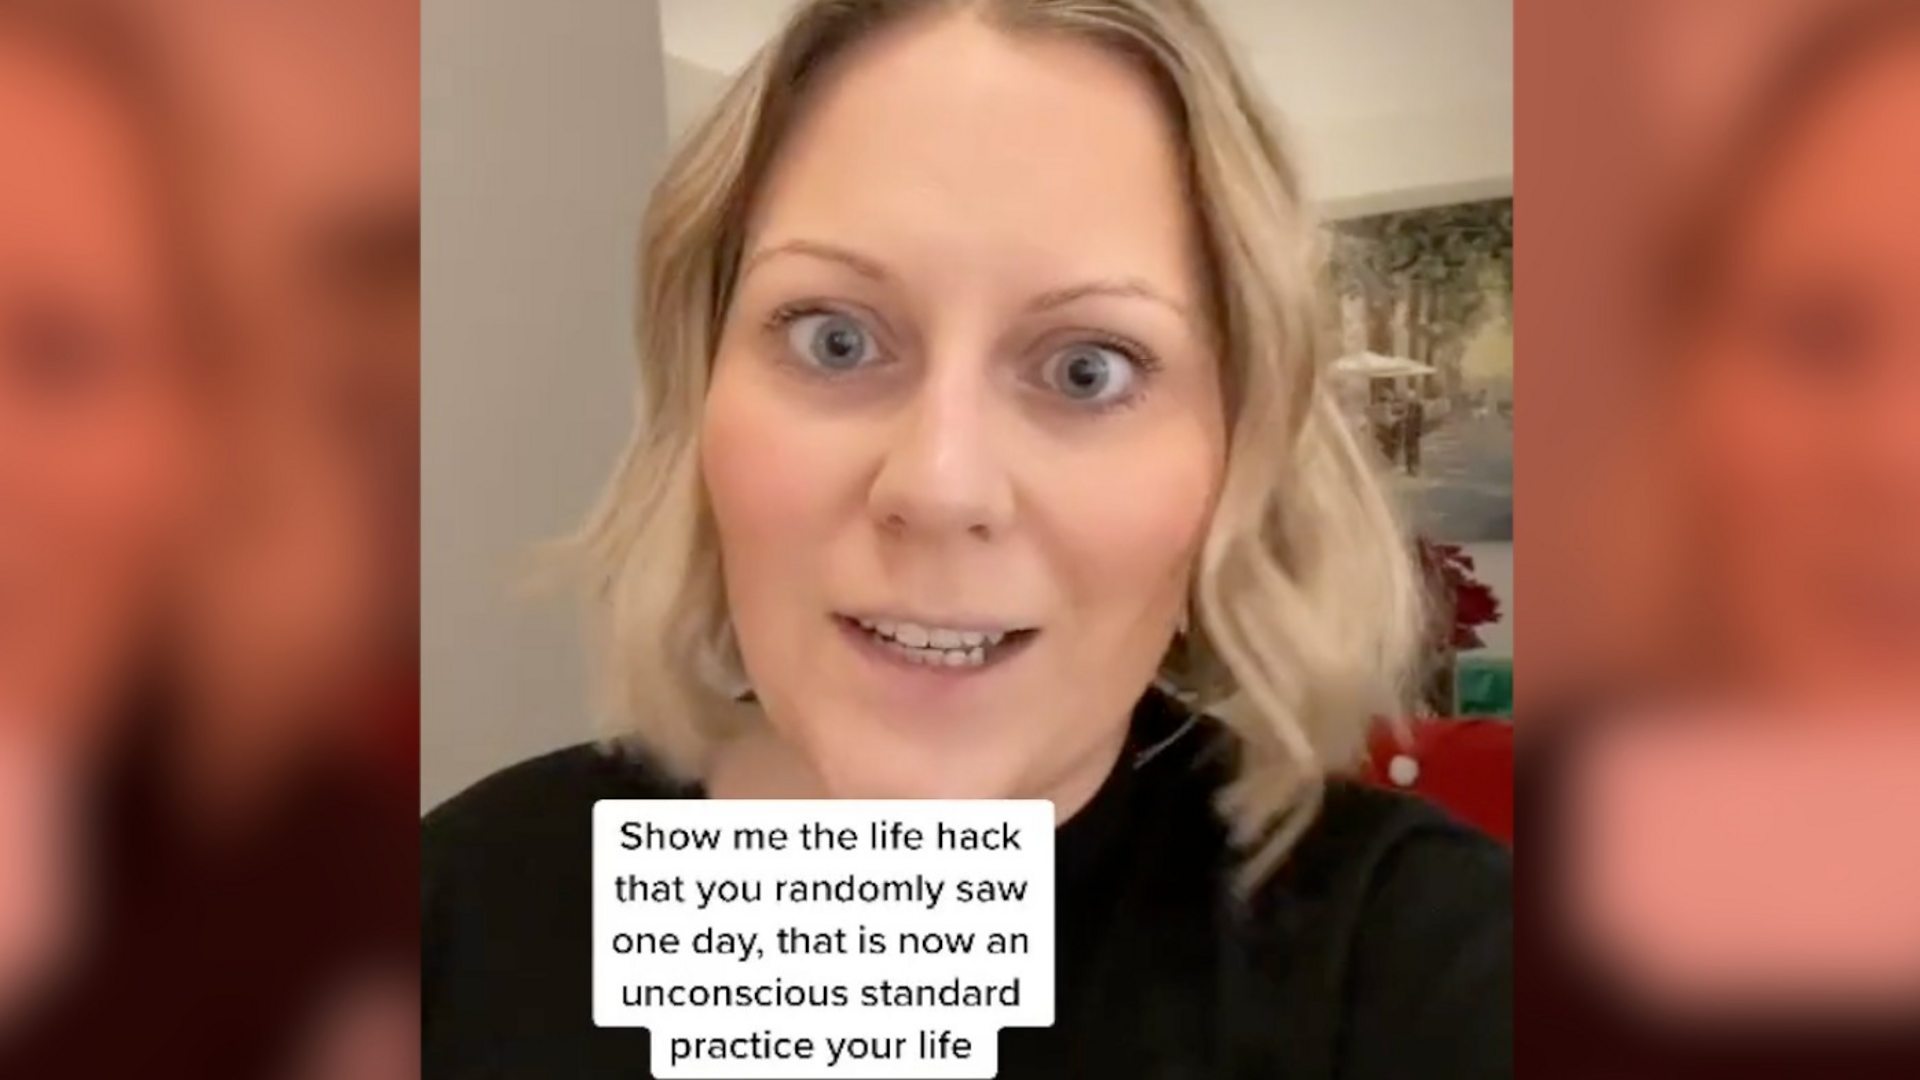 TikTok: How Newcastle woman's Show me the Life Hack went viral - BBC News